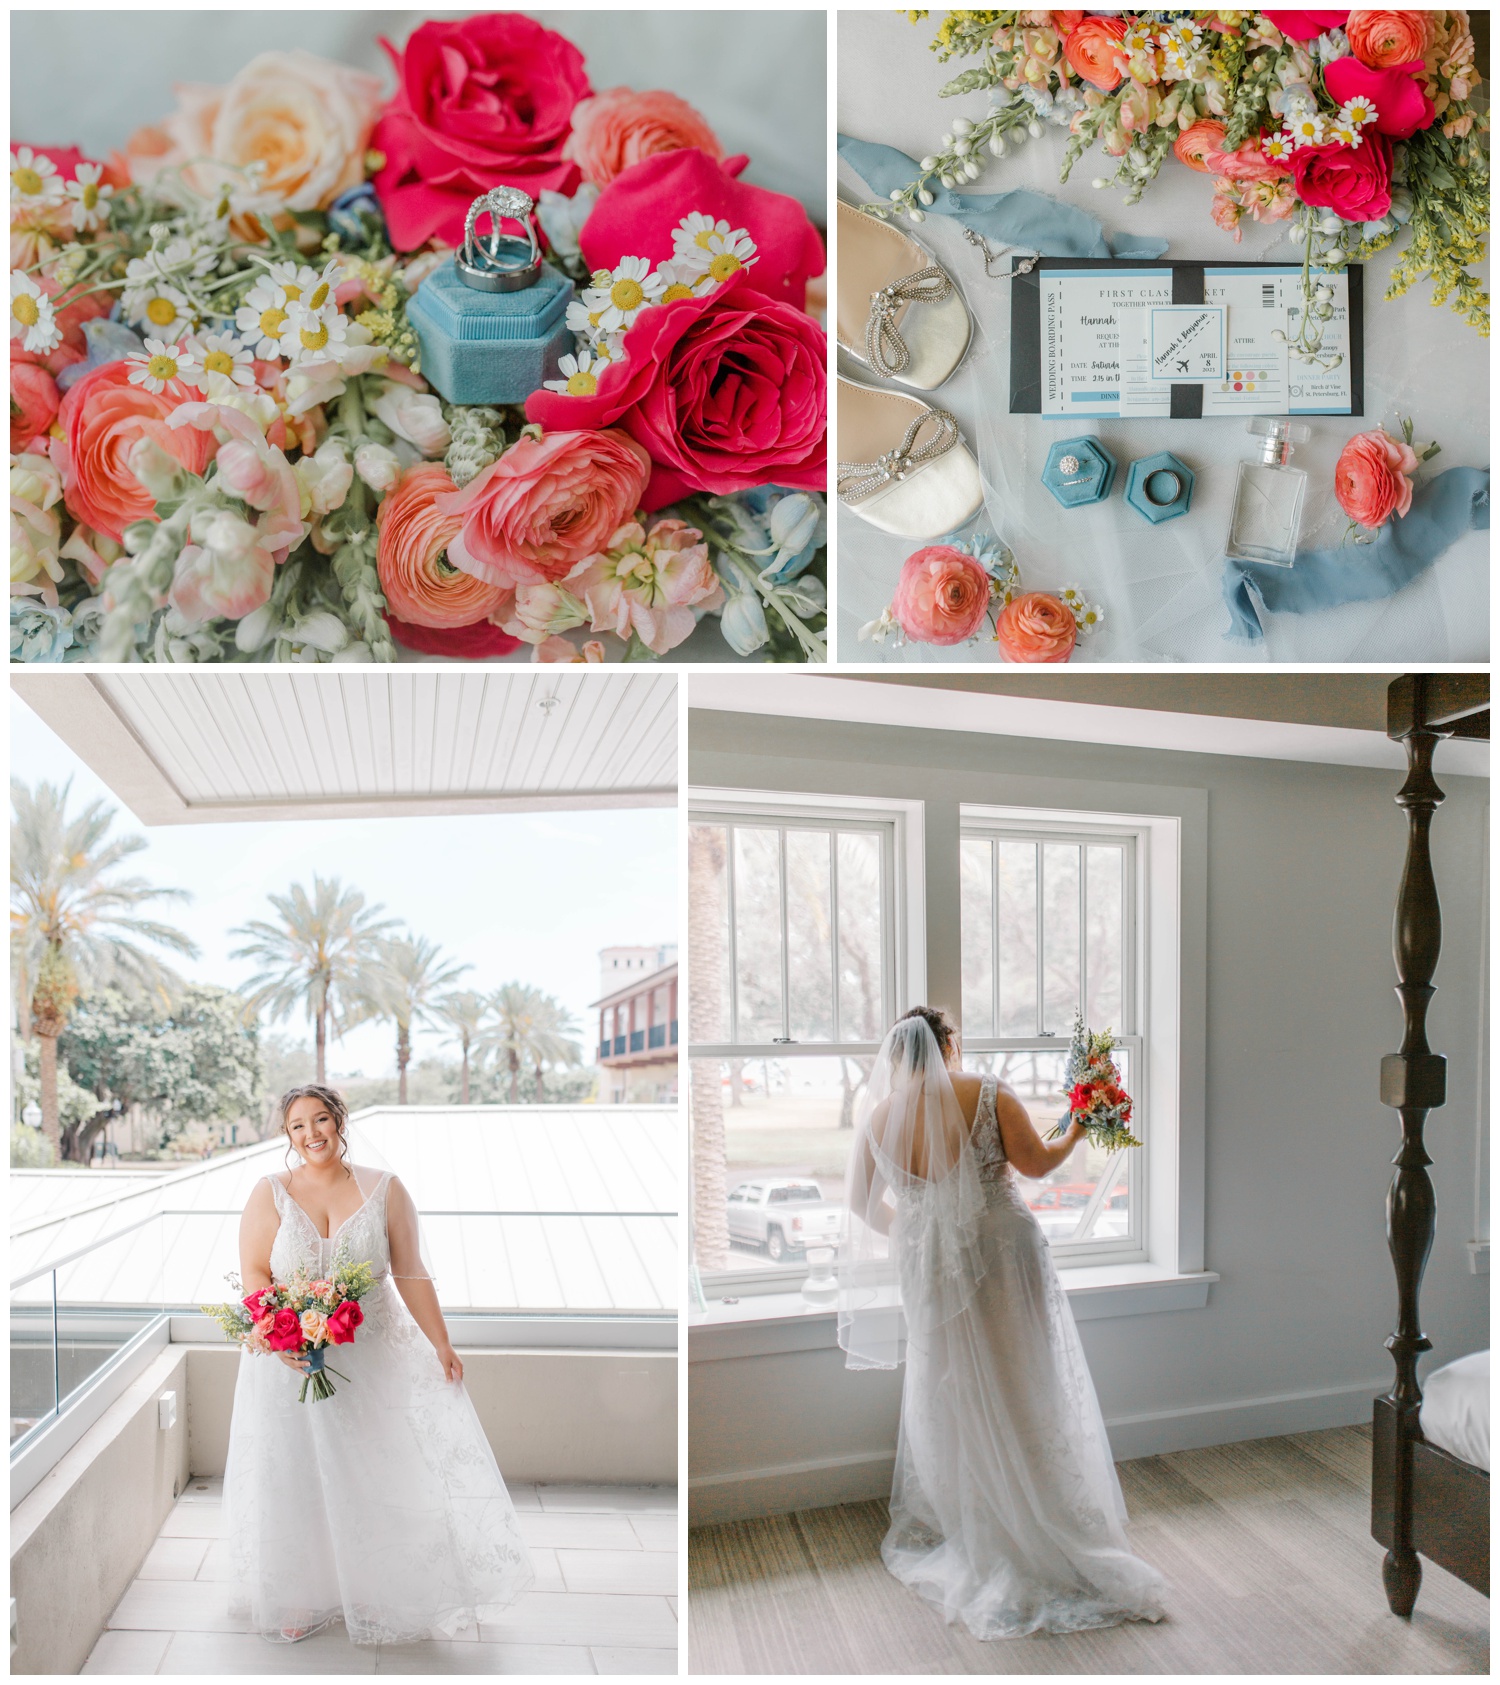 Elizabeth Baxter photography, arms of persephone flowers, Lasting Luxe Hair and makeup